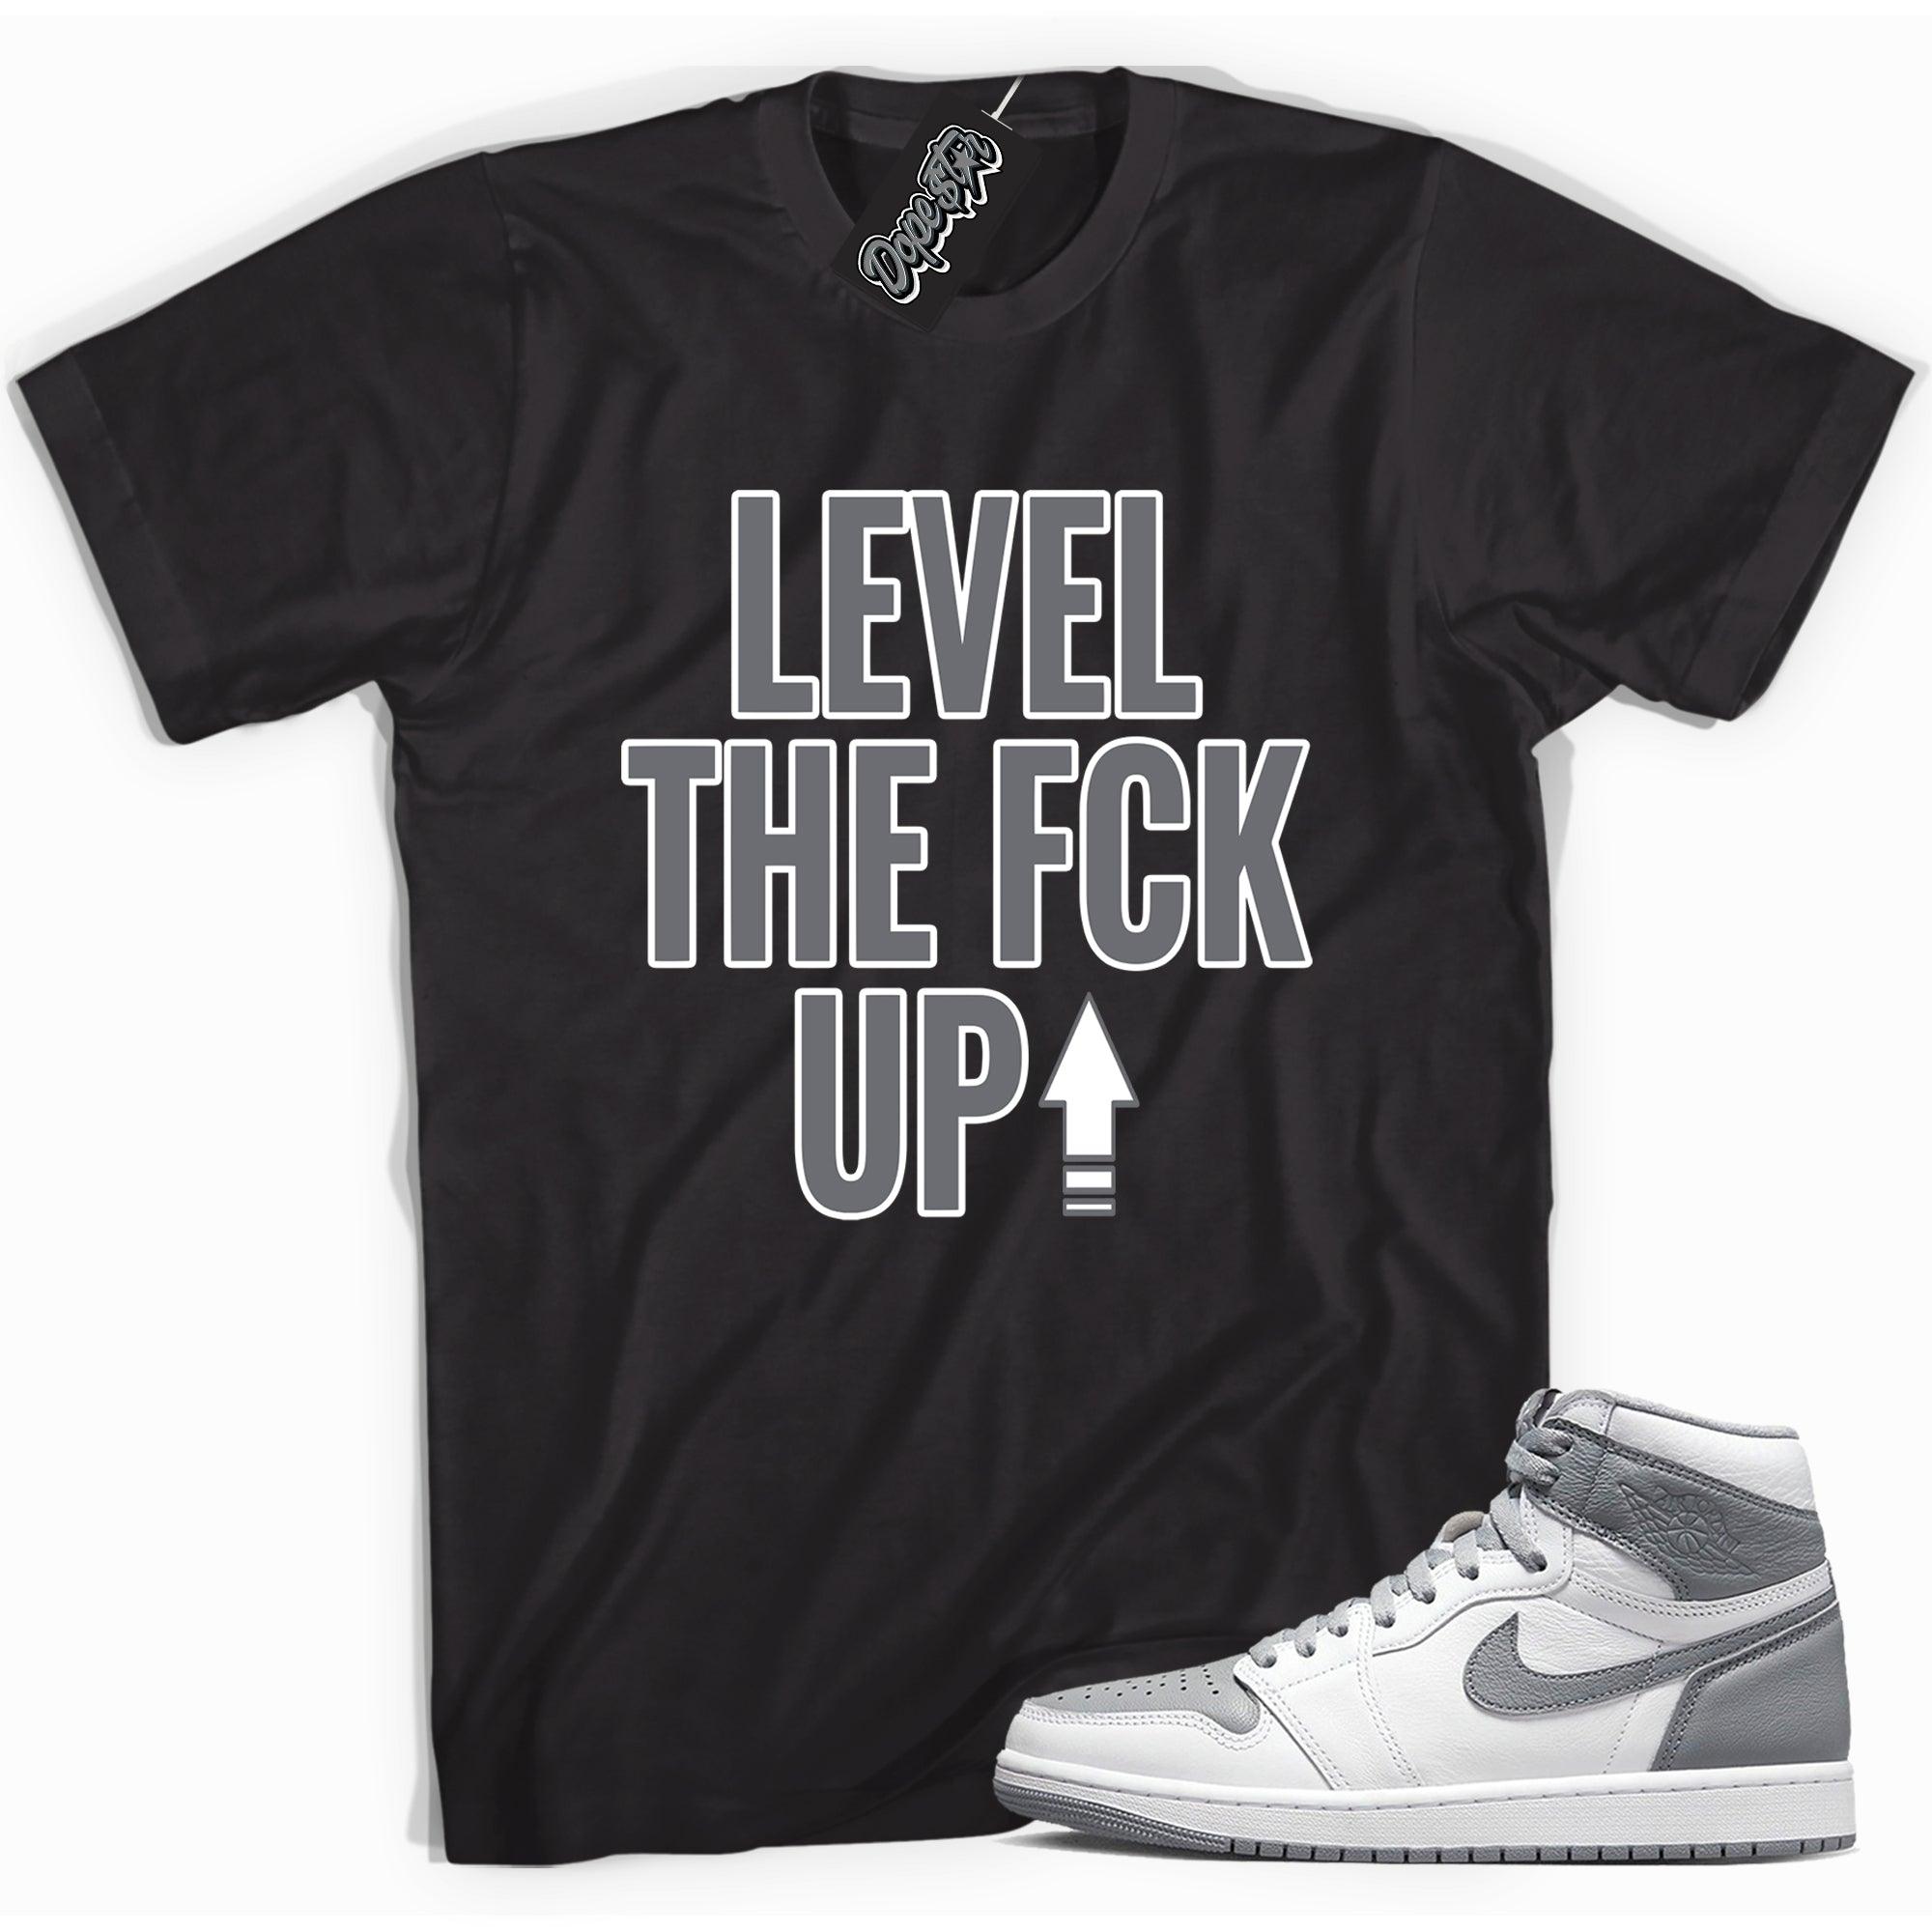 Cool black graphic tee with 'Level Up' print, that perfectly matches Air Jordan 1 High OG Stealth sneakers.